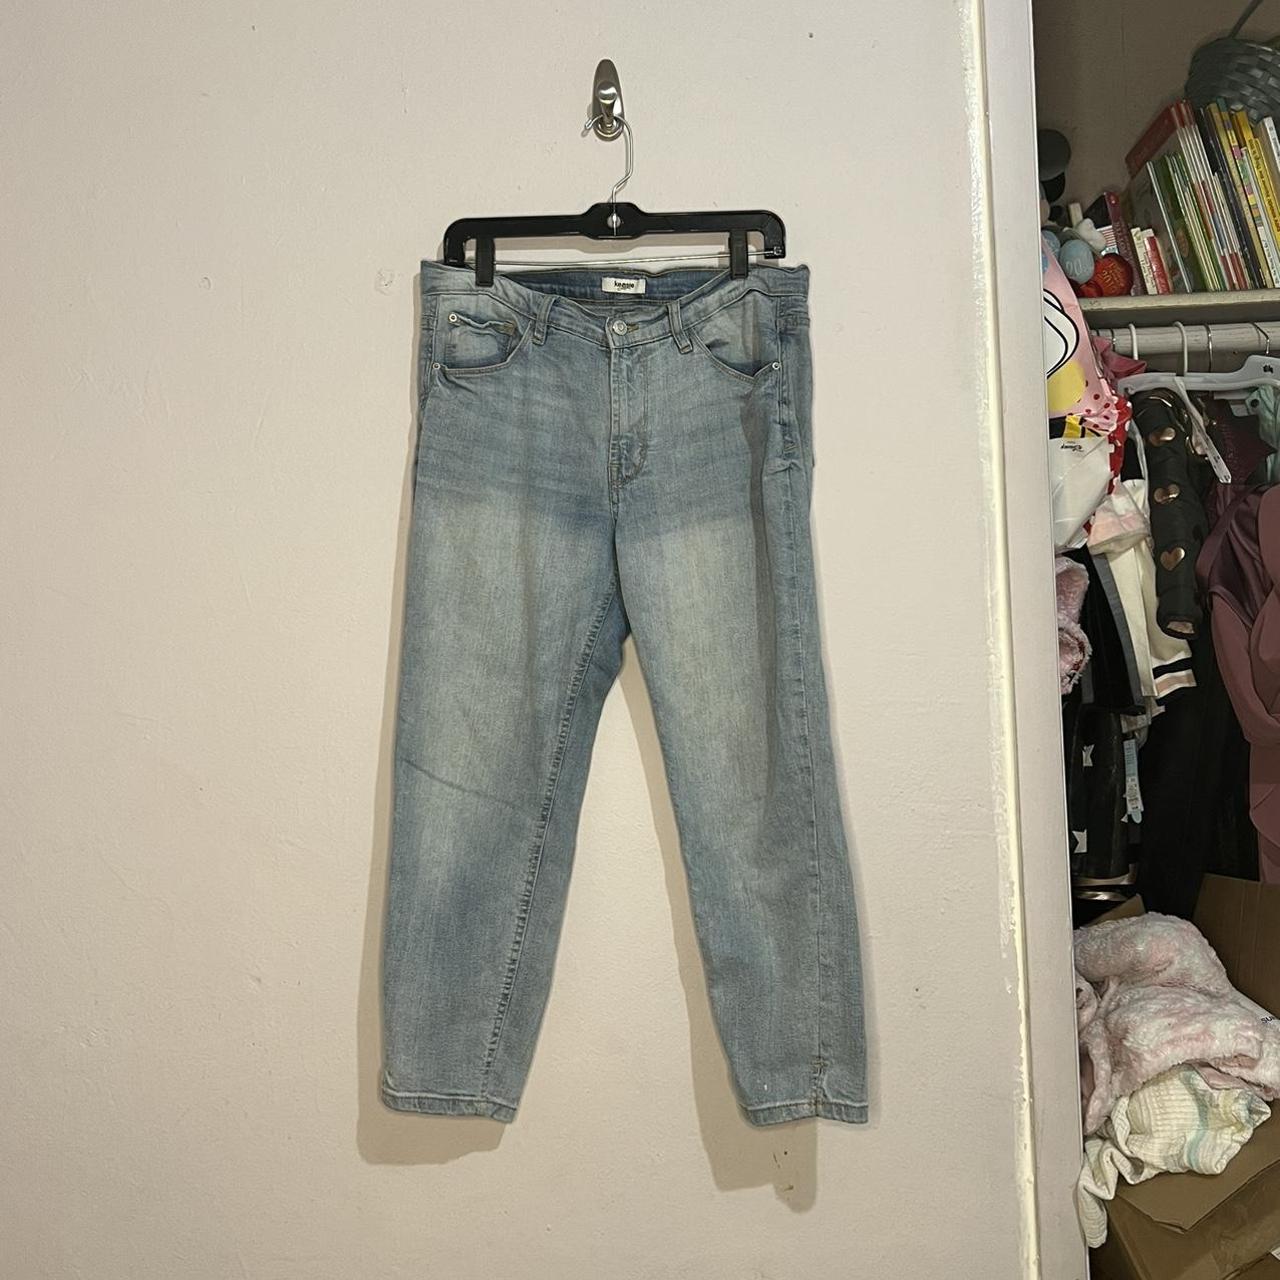 Product Image 1 - Kensie Jeans Ankle Length
Light wash